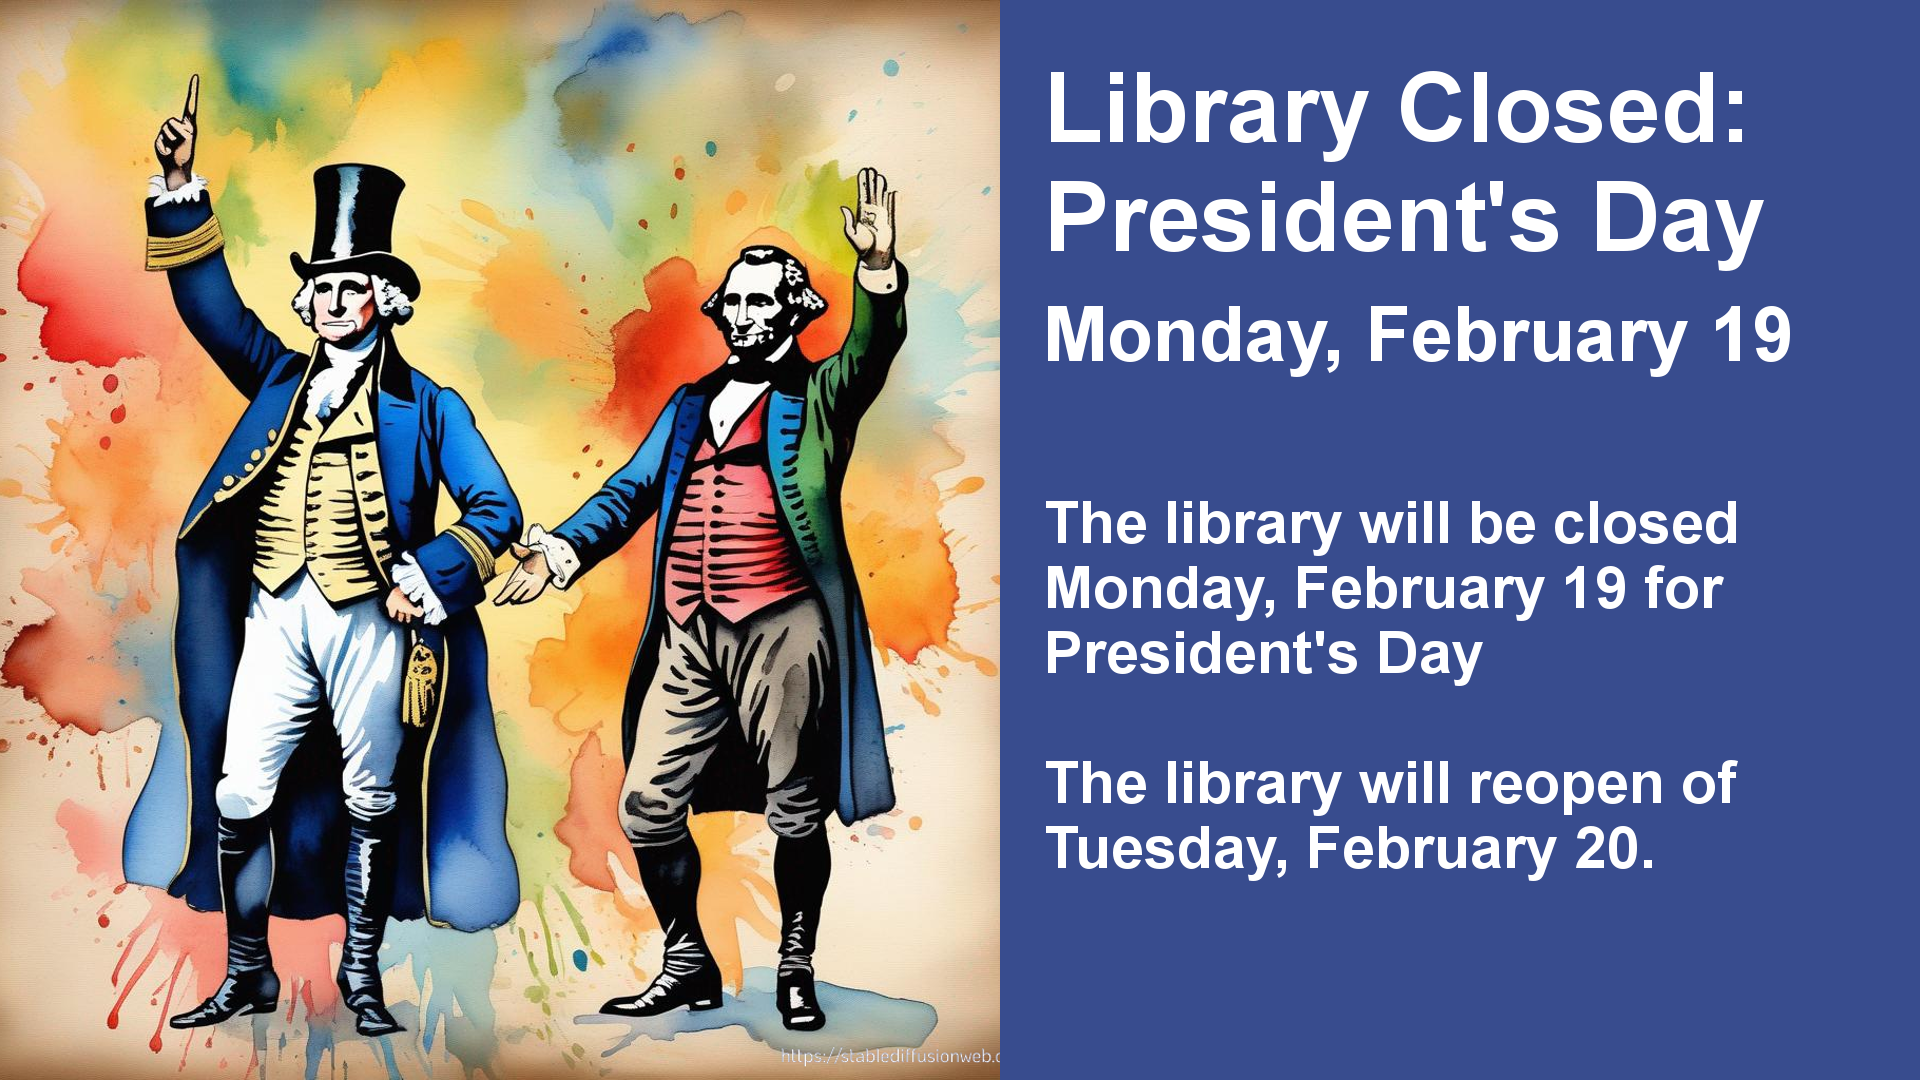 Library Closed:
President's Day

Monday, February 19



The library will be closed Monday, February 19 for President's Day

The library will reopen of Tuesday, February 20.